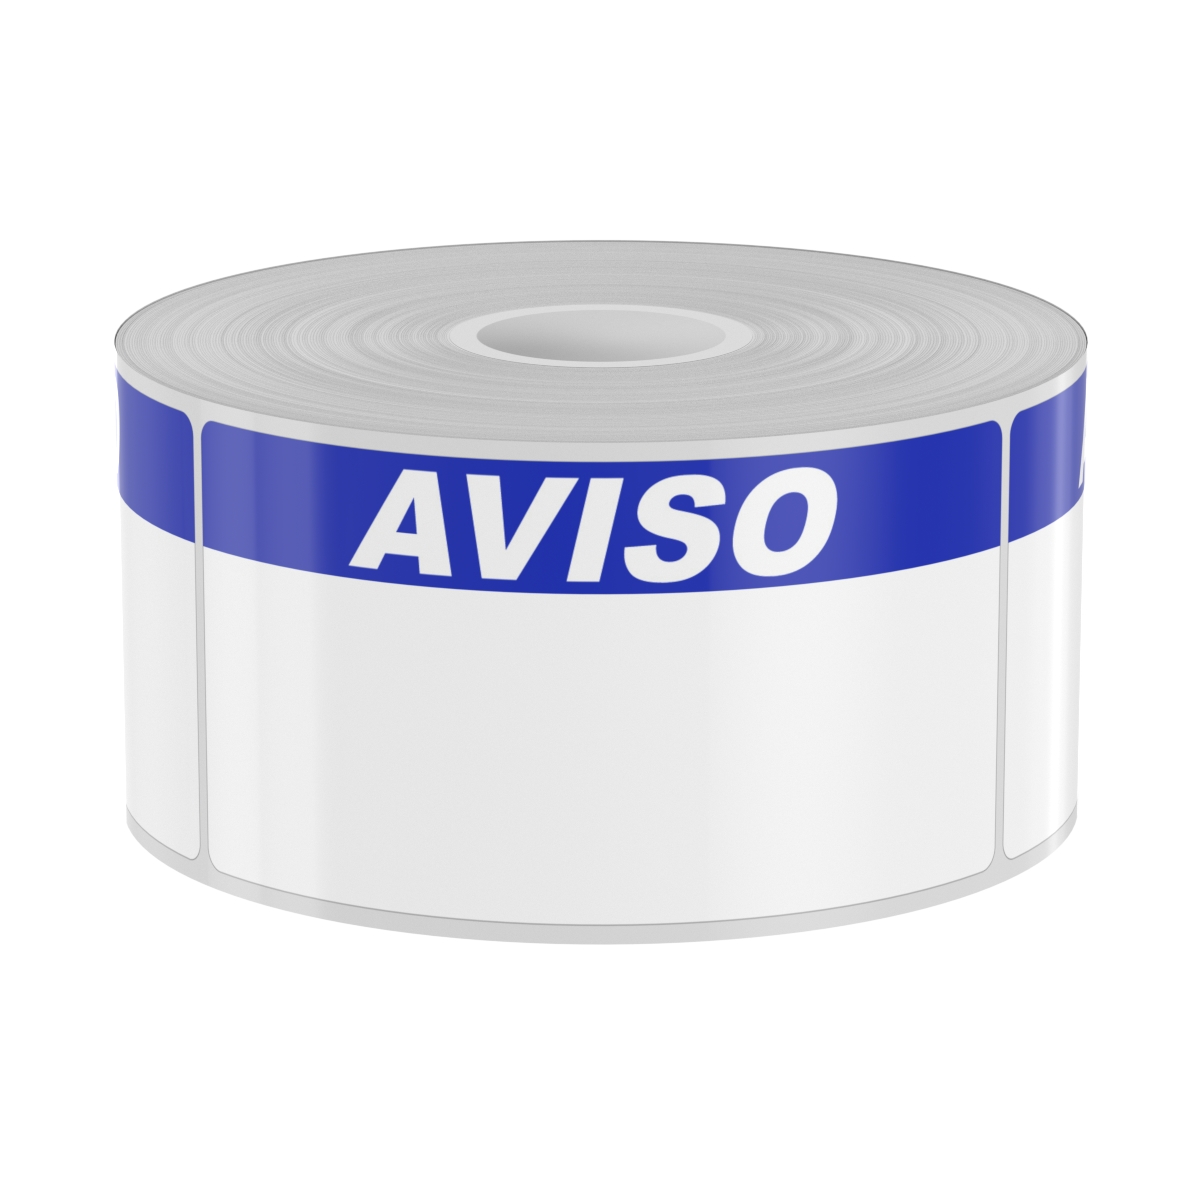 Detail view for 250 2" x 4" Labels with Blue AVISO Header